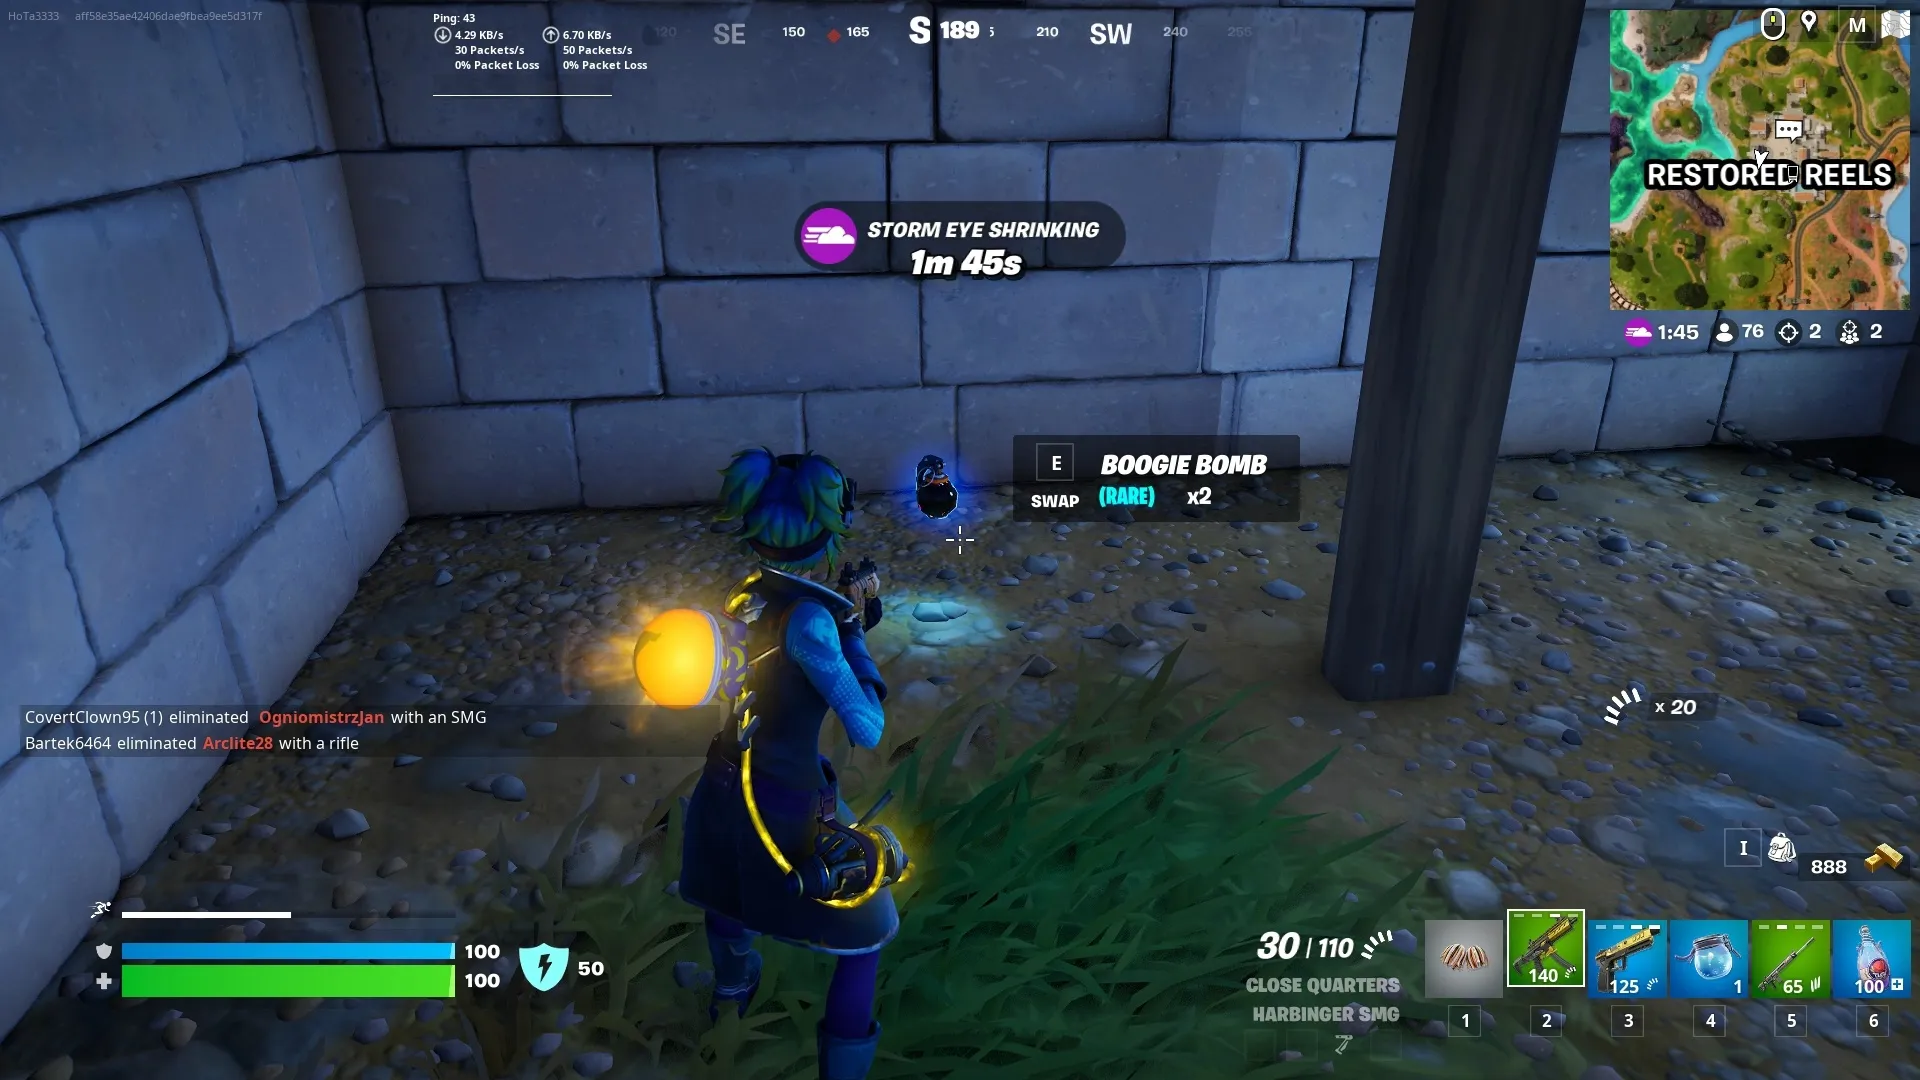 Fortnite Guide: How To Get and Use Boogie Bombs